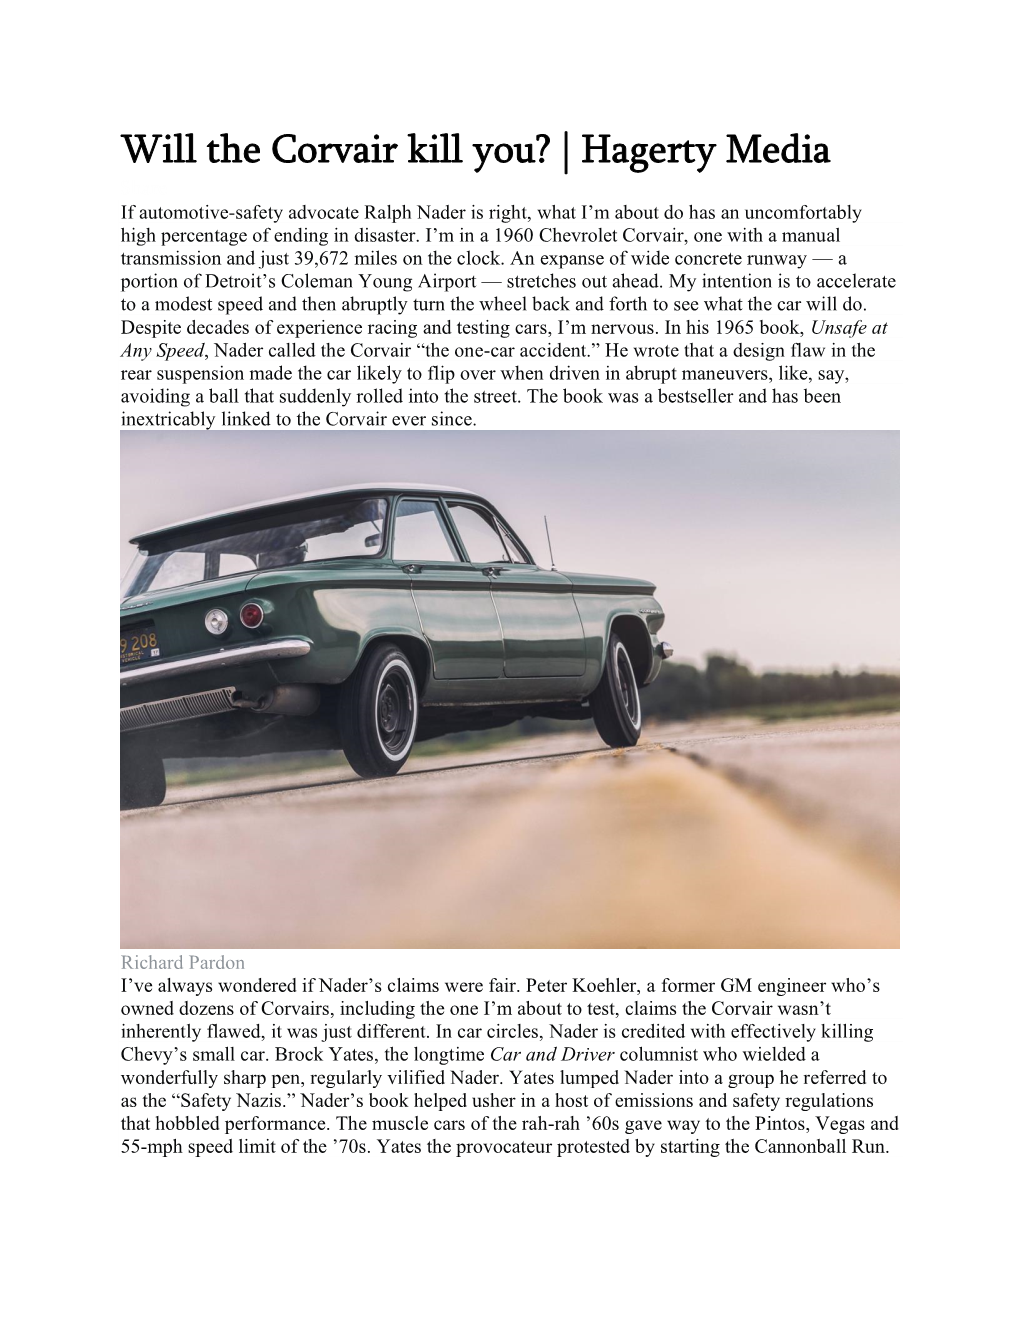 Will the Corvair Kill You? | Hagerty Media